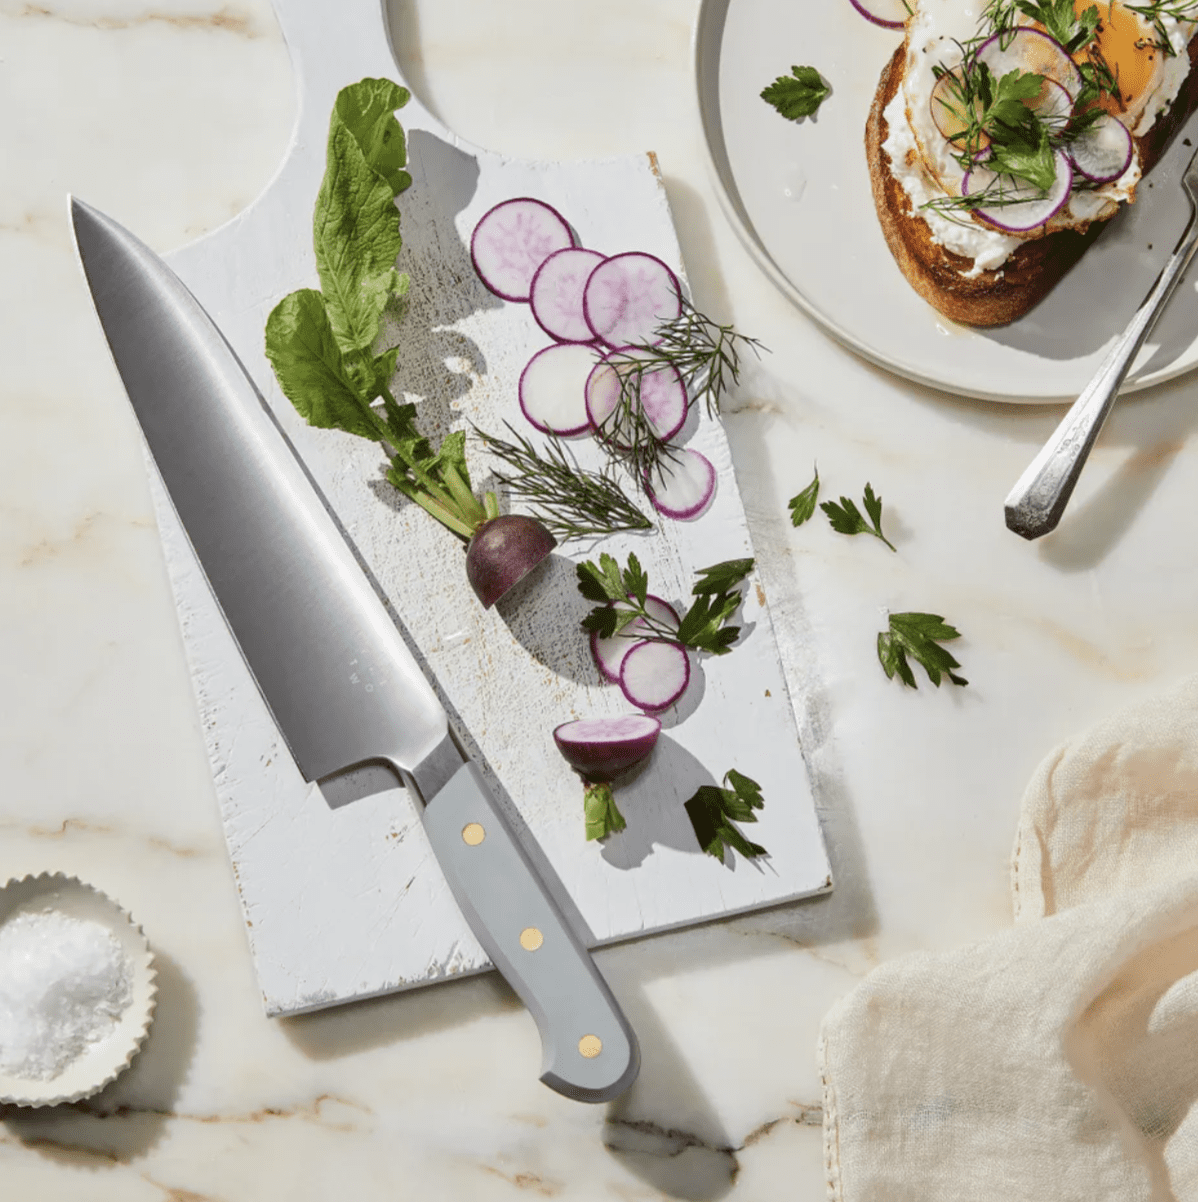 Blatant Knife after 1 year. #foodie #foodreview #kitchen #cooking